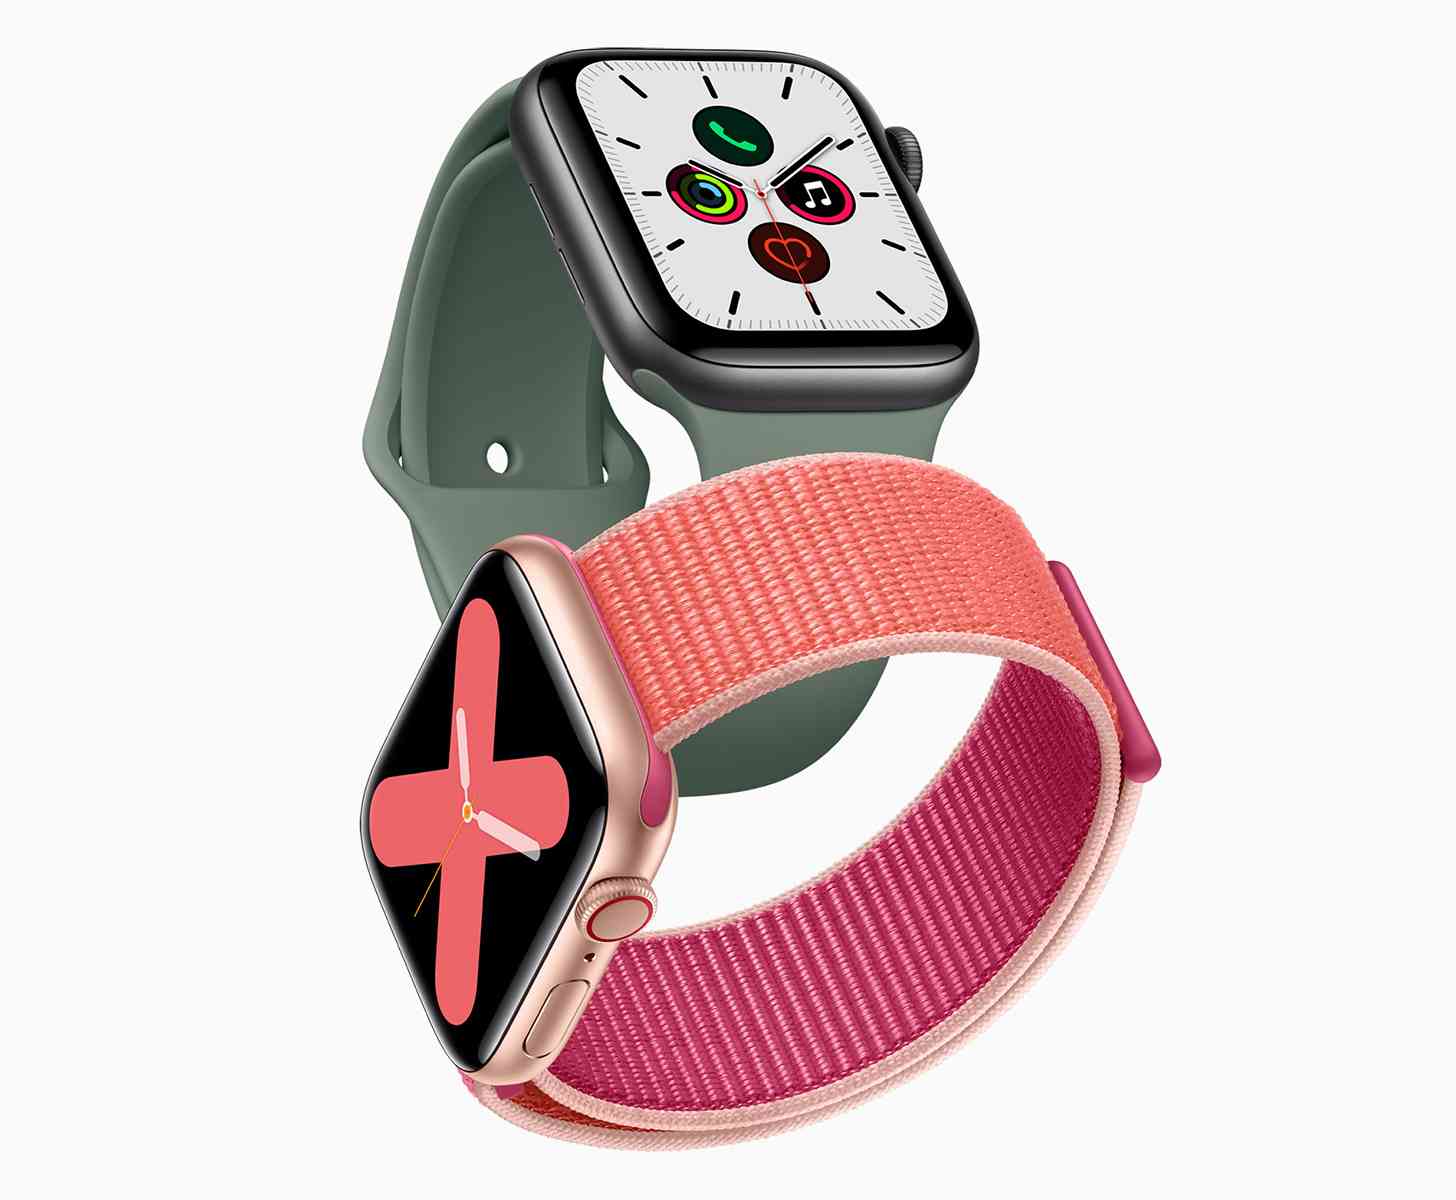 Apple Watch Series 5 official